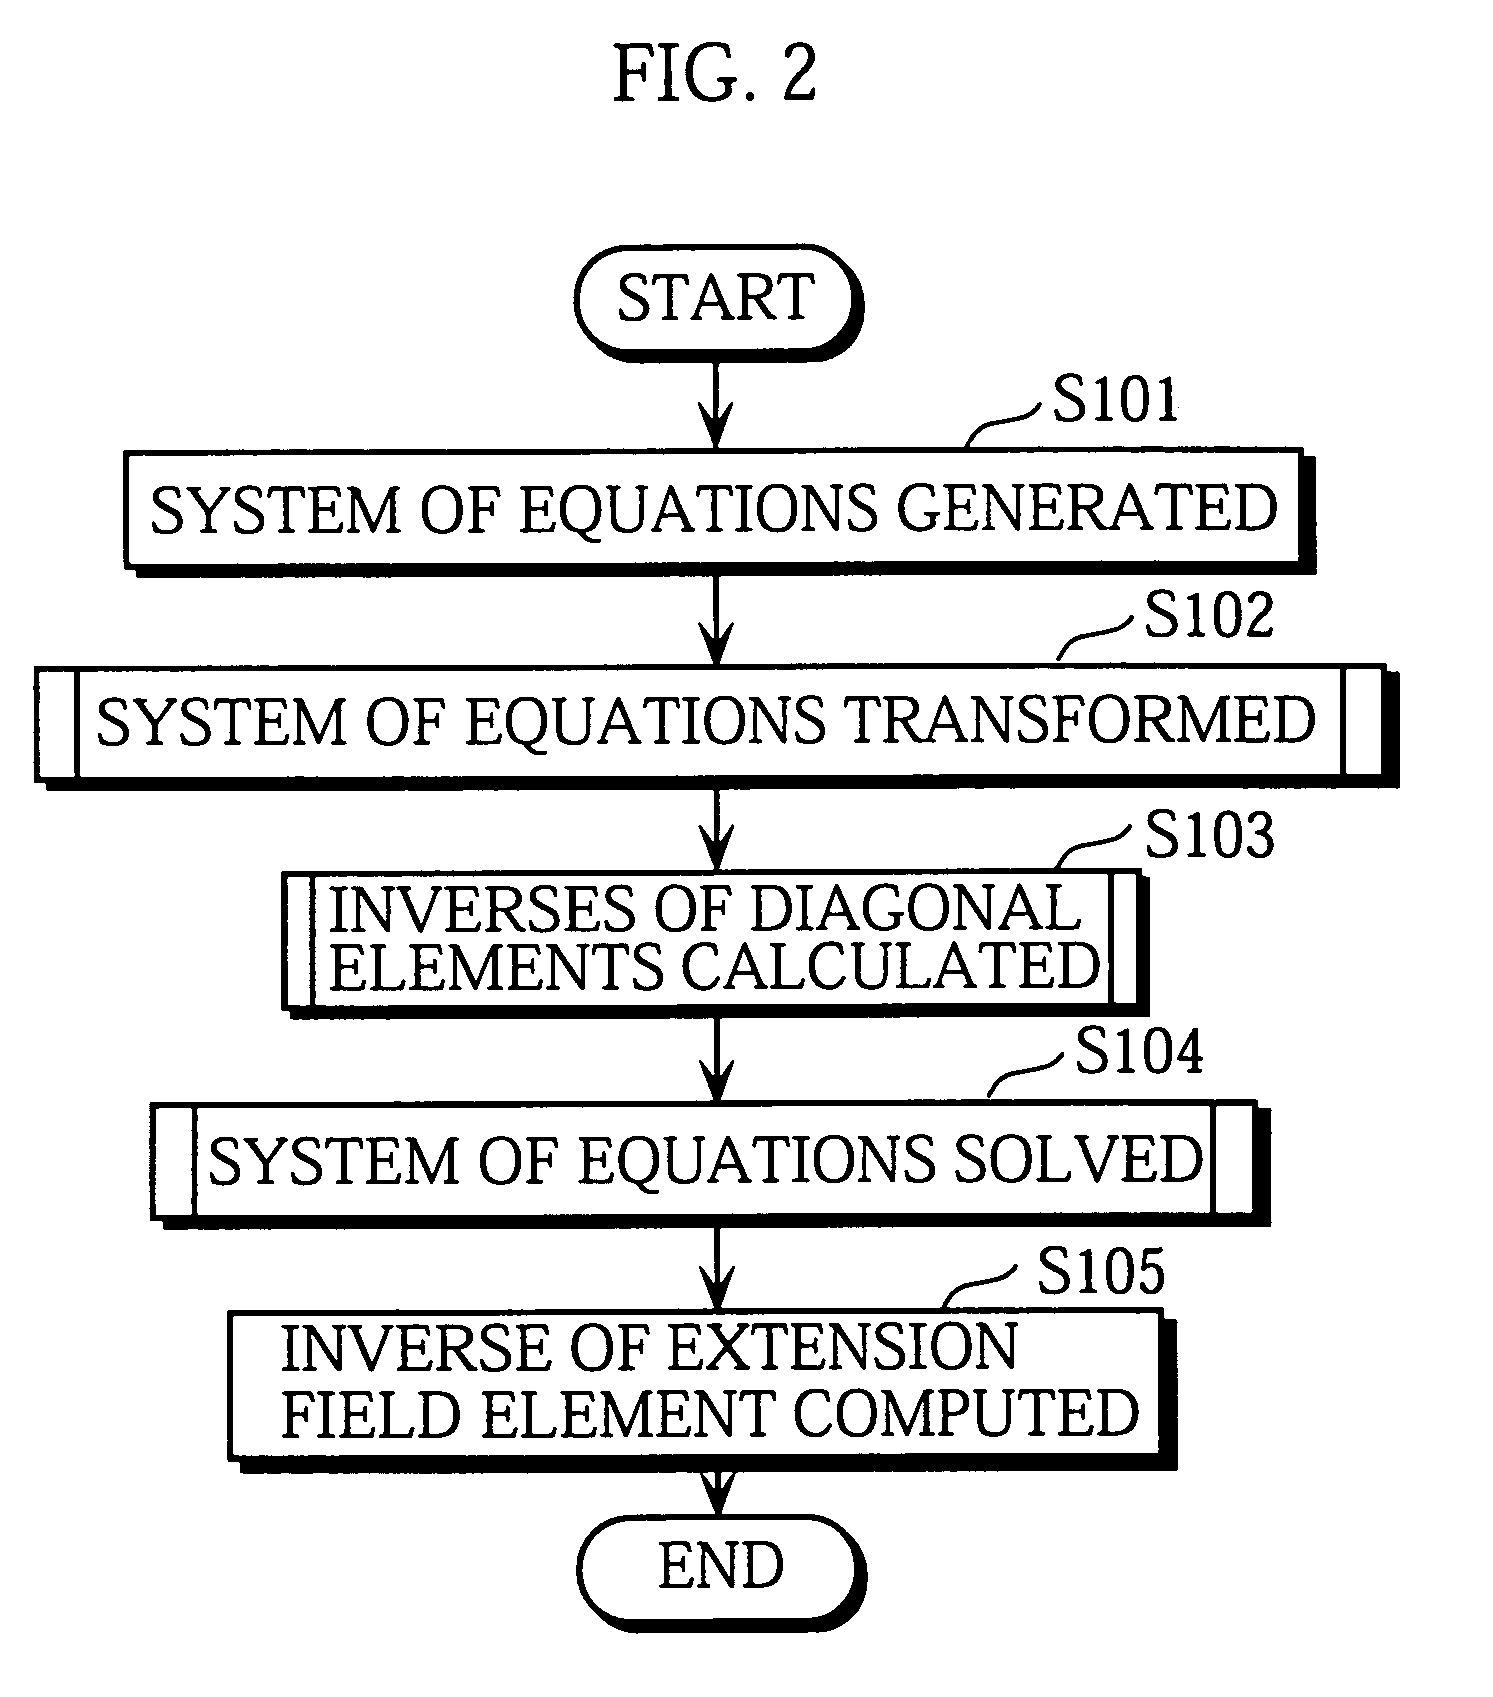 Apparatus for solving system of equations on finite field and apparatus for inverting element of extension field